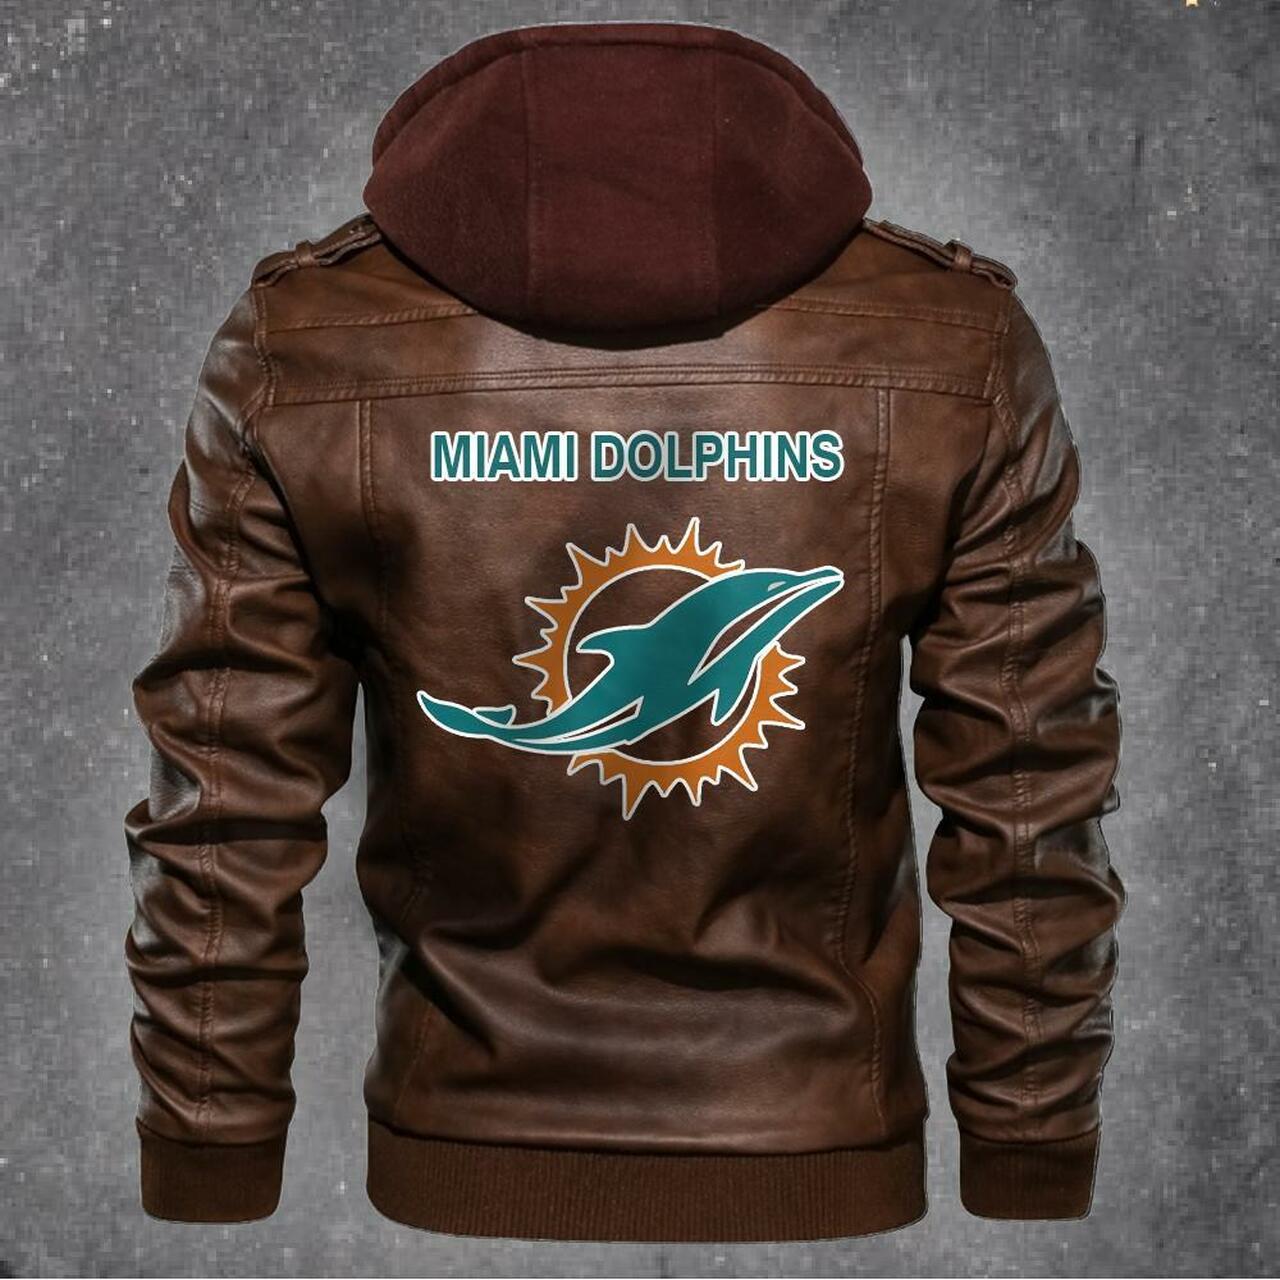 NFL Miami Dolphins Football Leather Jacket Motorcycle